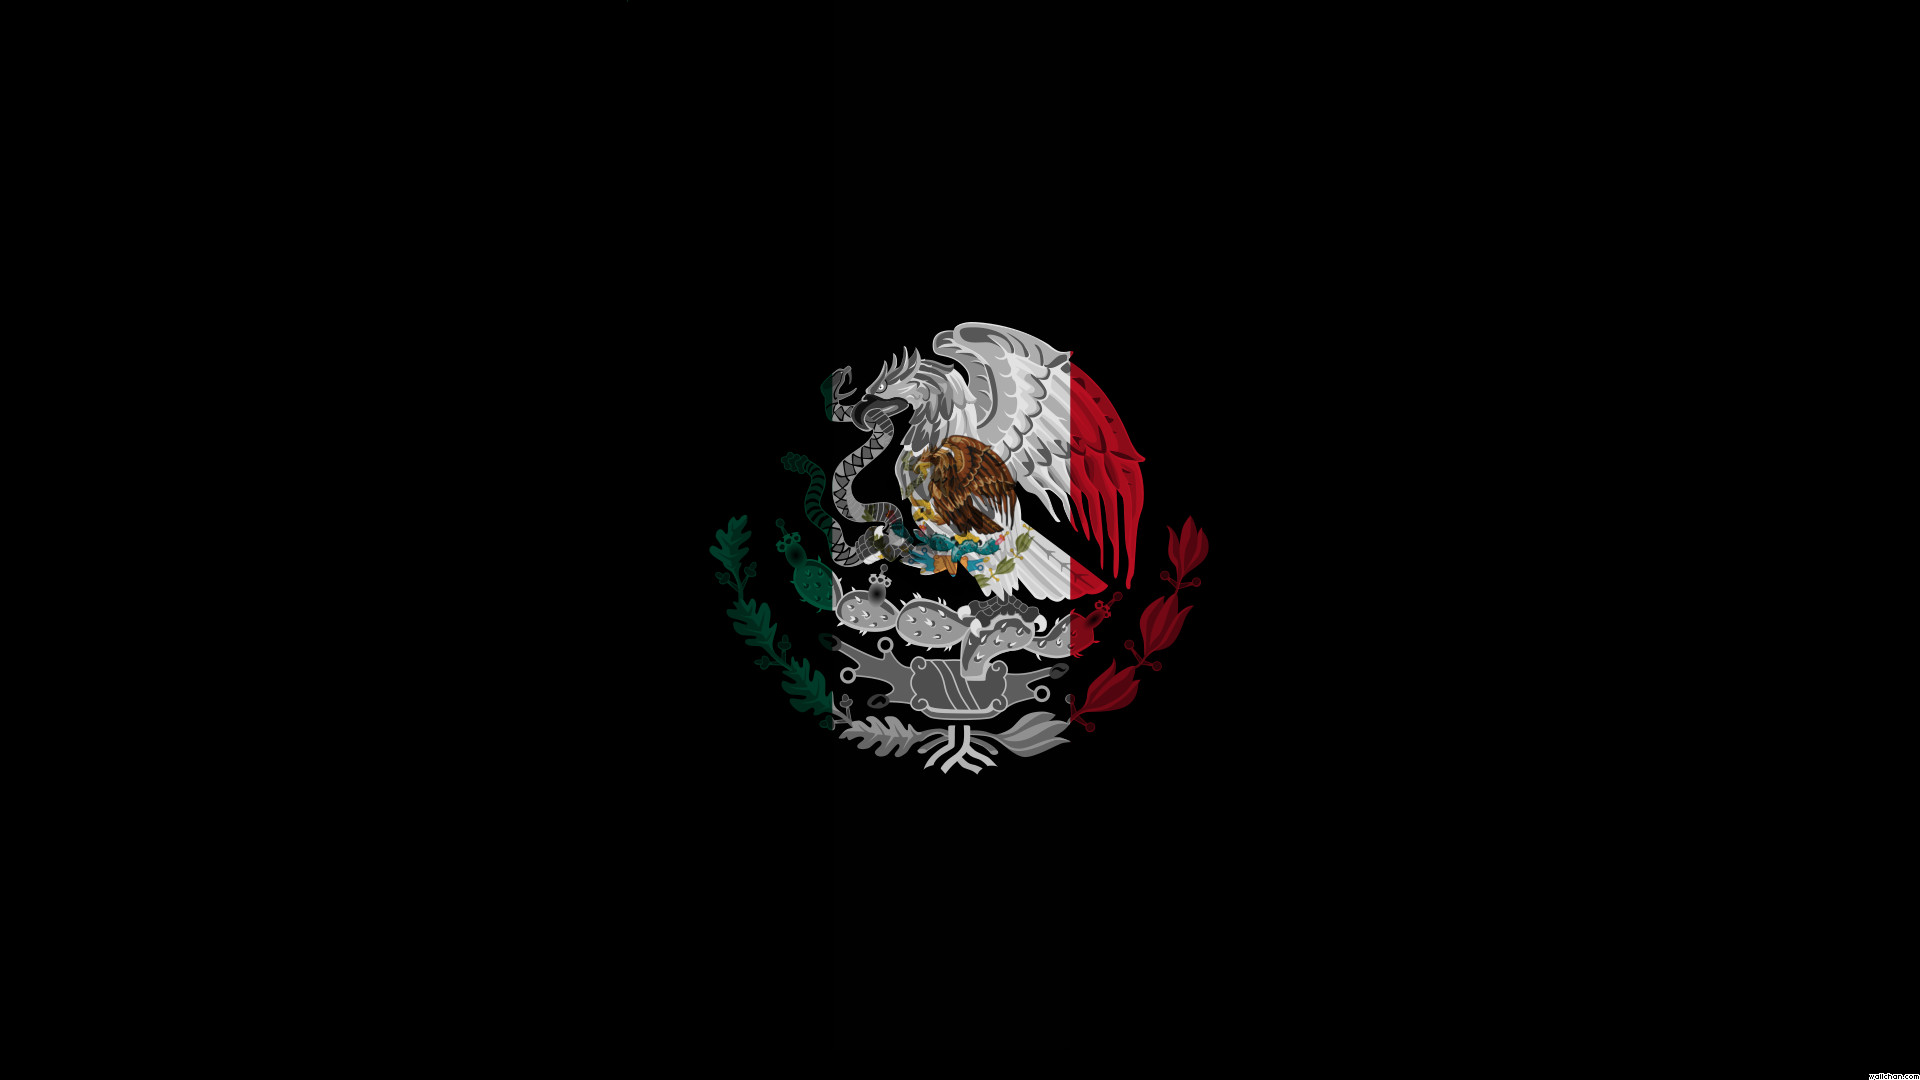 1920x1080 Mexico HD Wallpapers Backgrounds Wallpaper | HD Wallpapers | Pinterest | Hd  wallpaper, Wallpaper and Wallpaper backgrounds